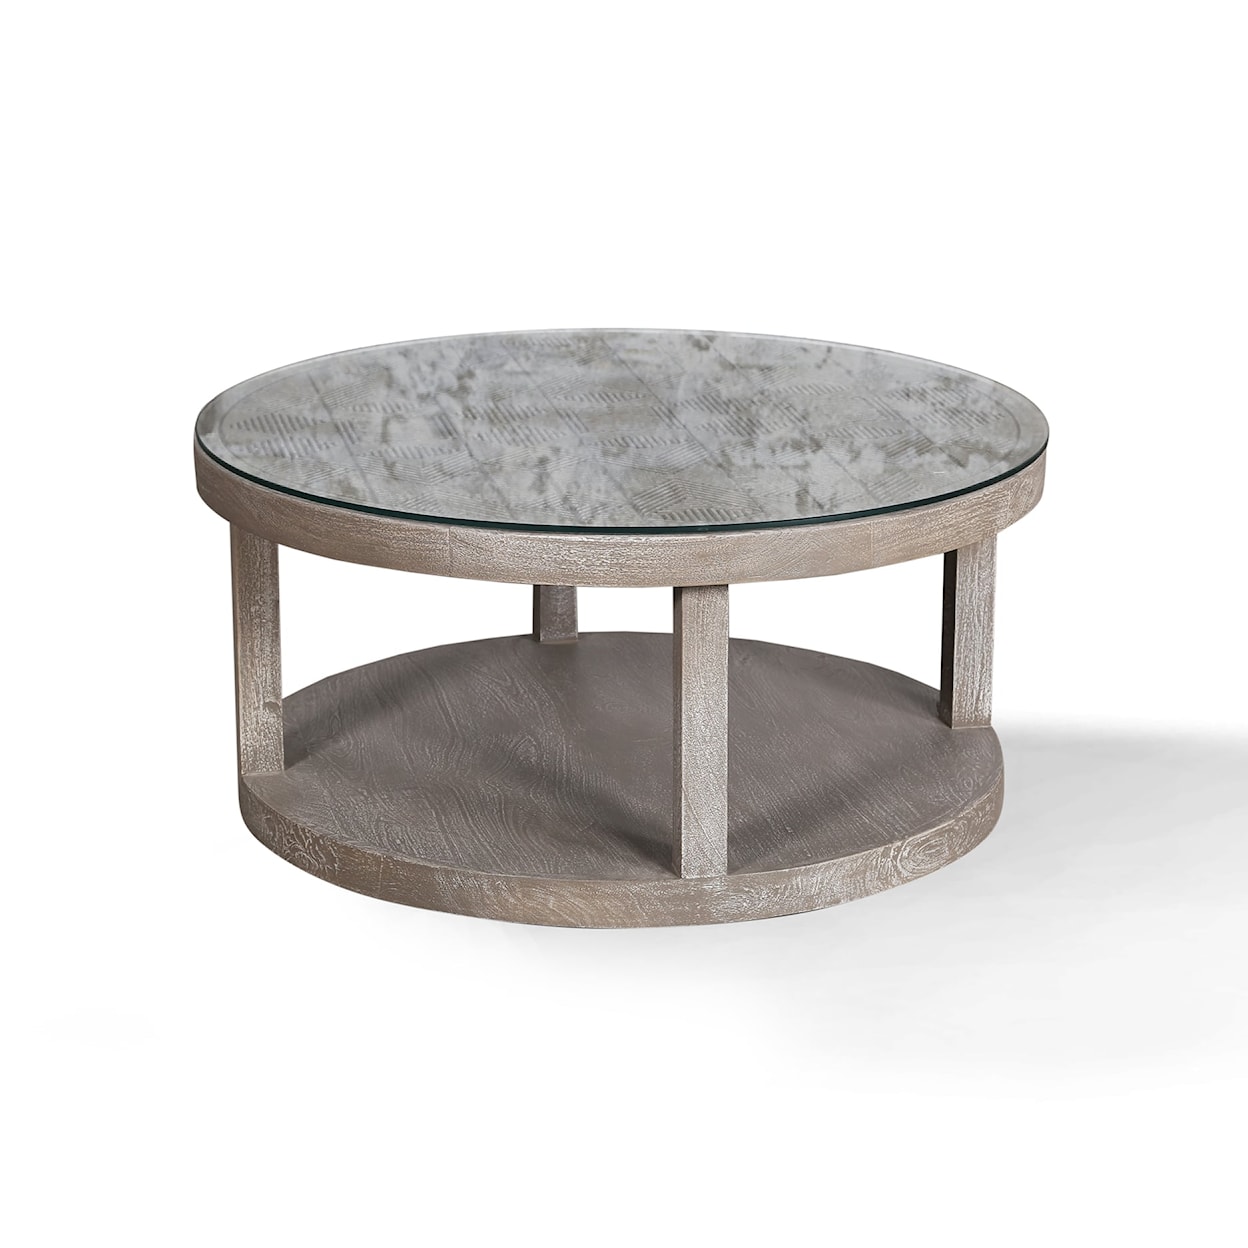 Parker House Crossings Serengeti Round Cocktail Table